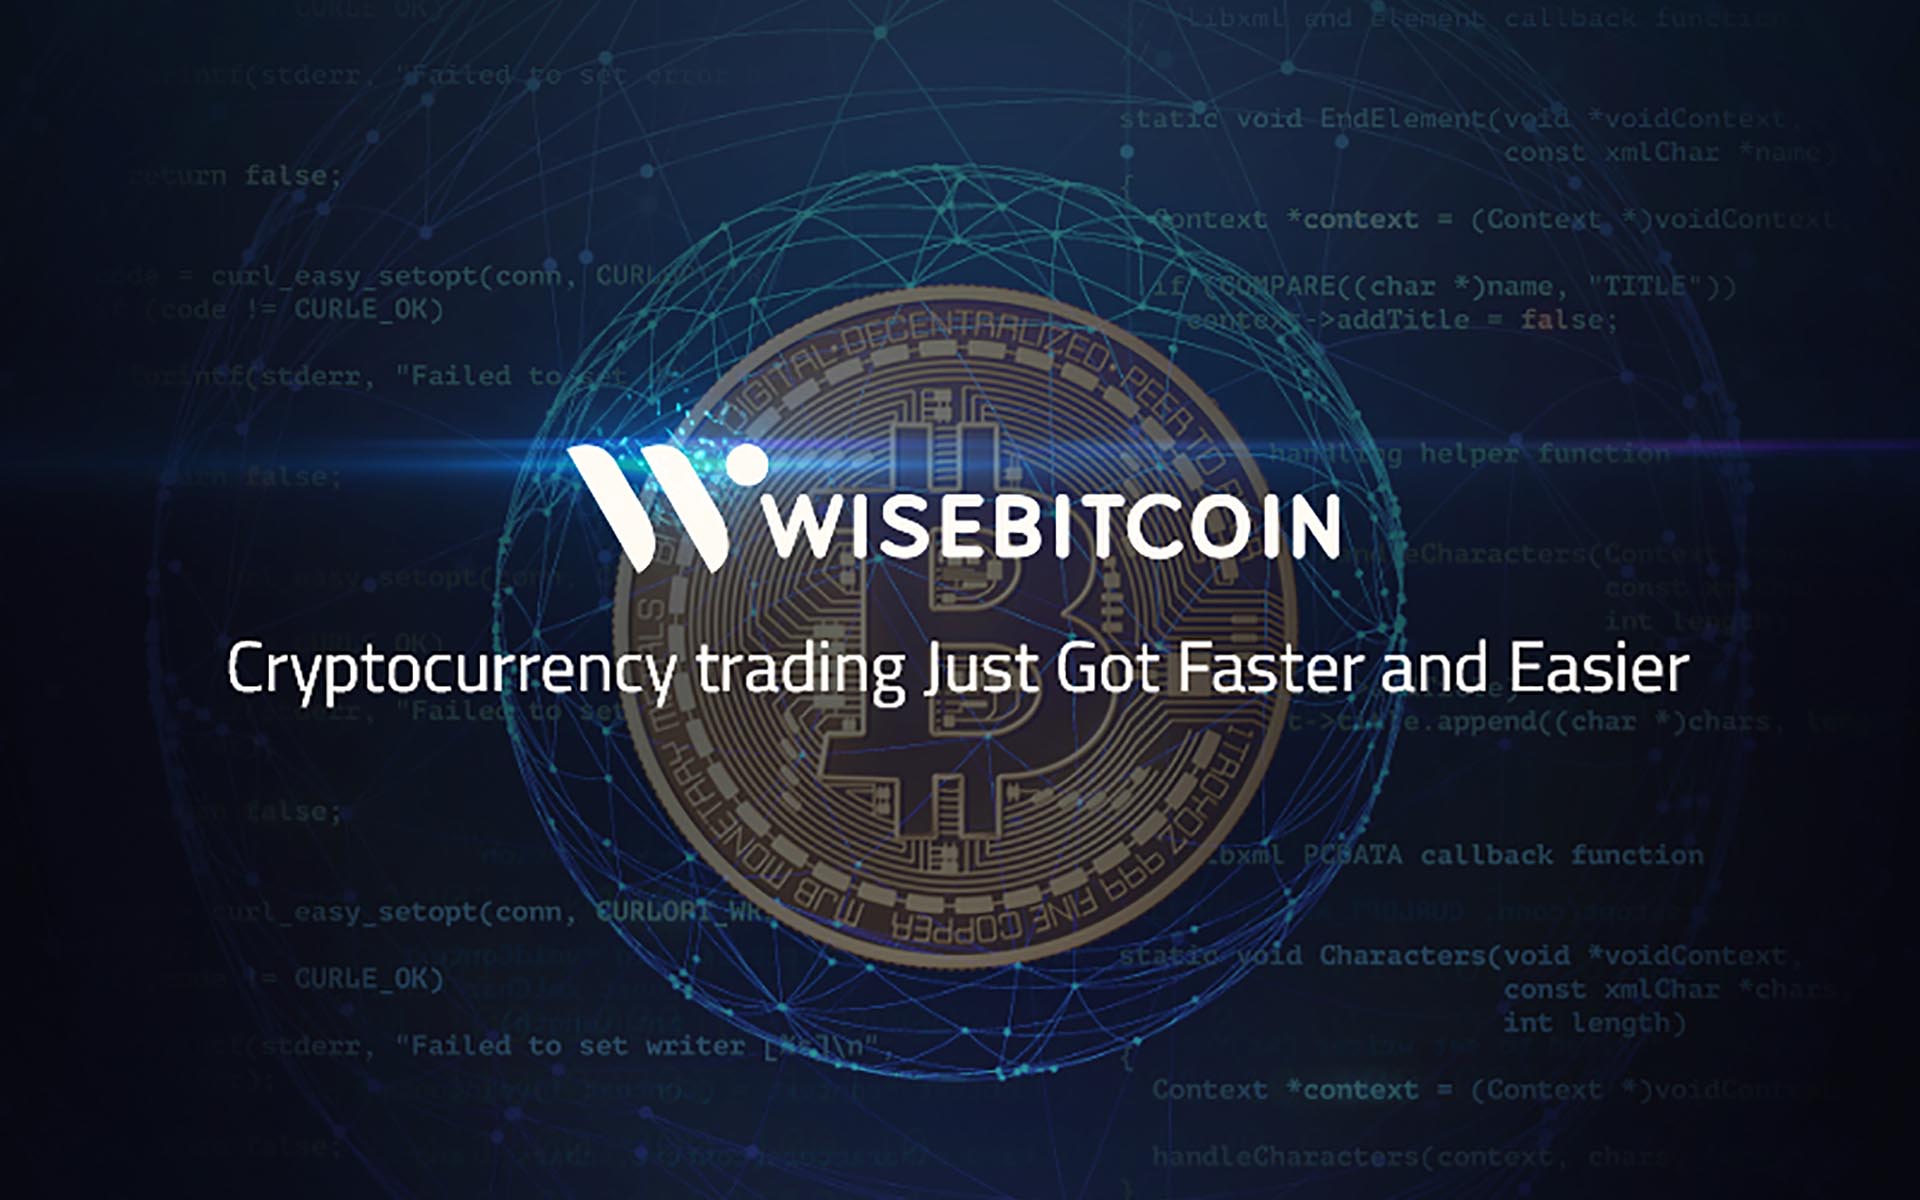 Wisebitcoin Launches the First Ever Cryptocurrency Trading ...